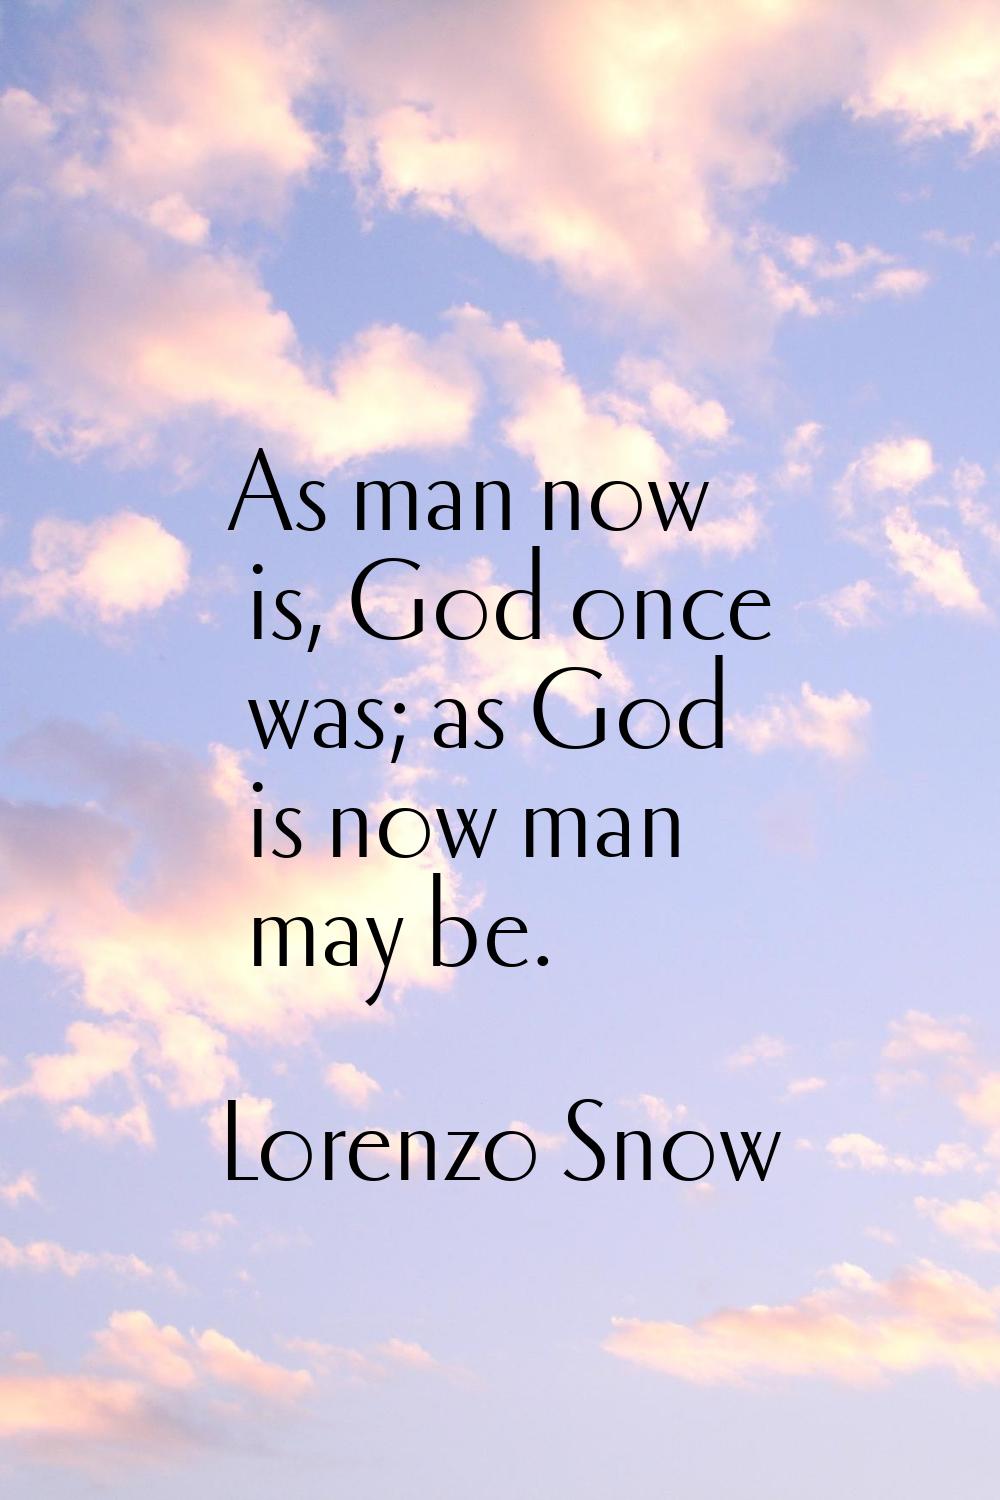 As man now is, God once was; as God is now man may be.